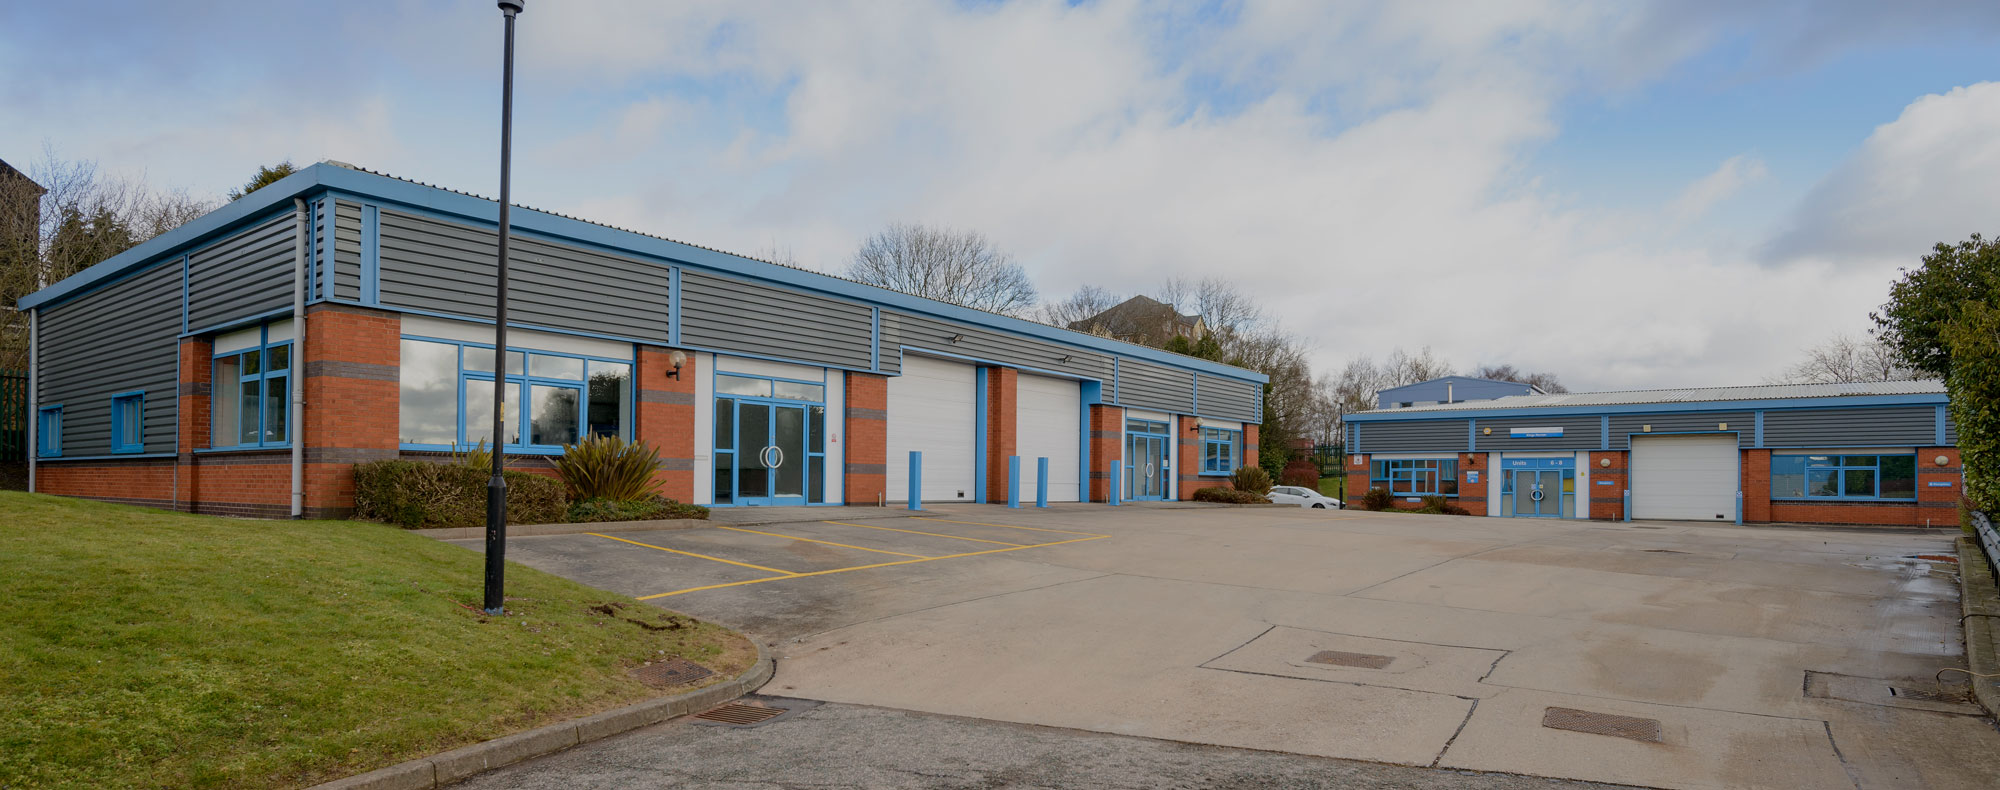 Over 800,000 sq ft of industrial/warehouse, showroom and office accommodation